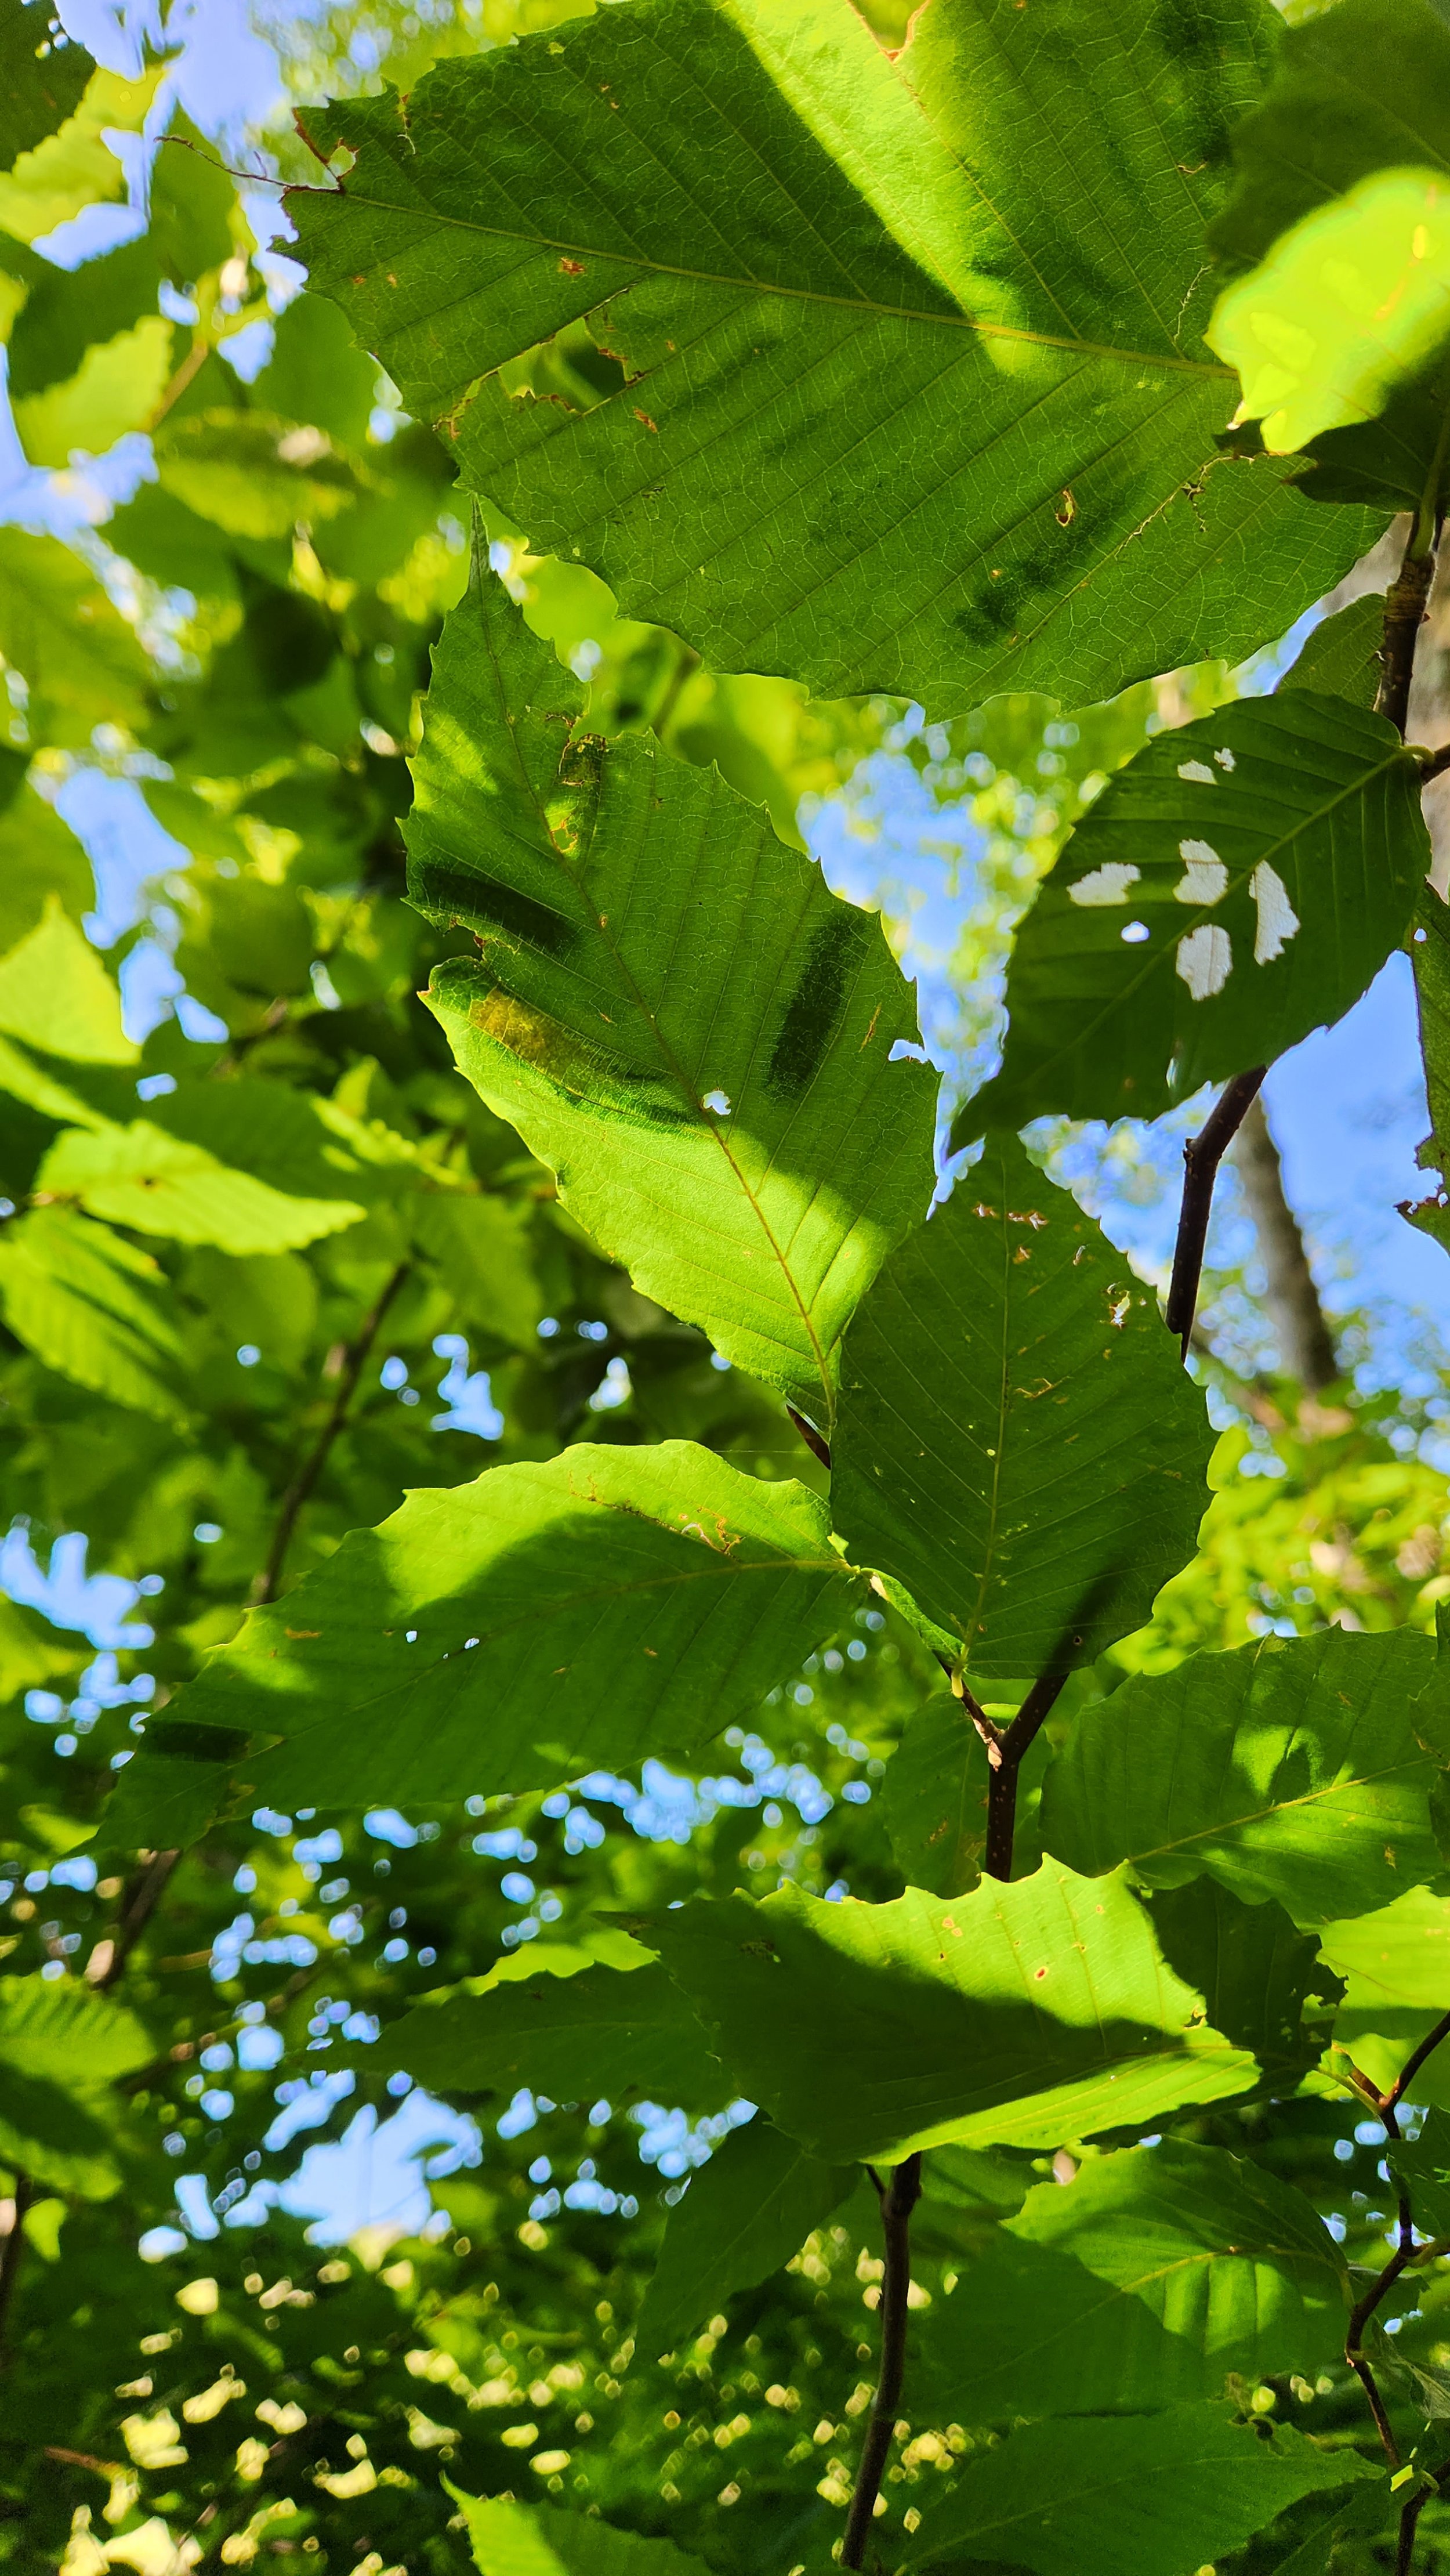 Beech leaf disease in the canopy - Sarah Coney